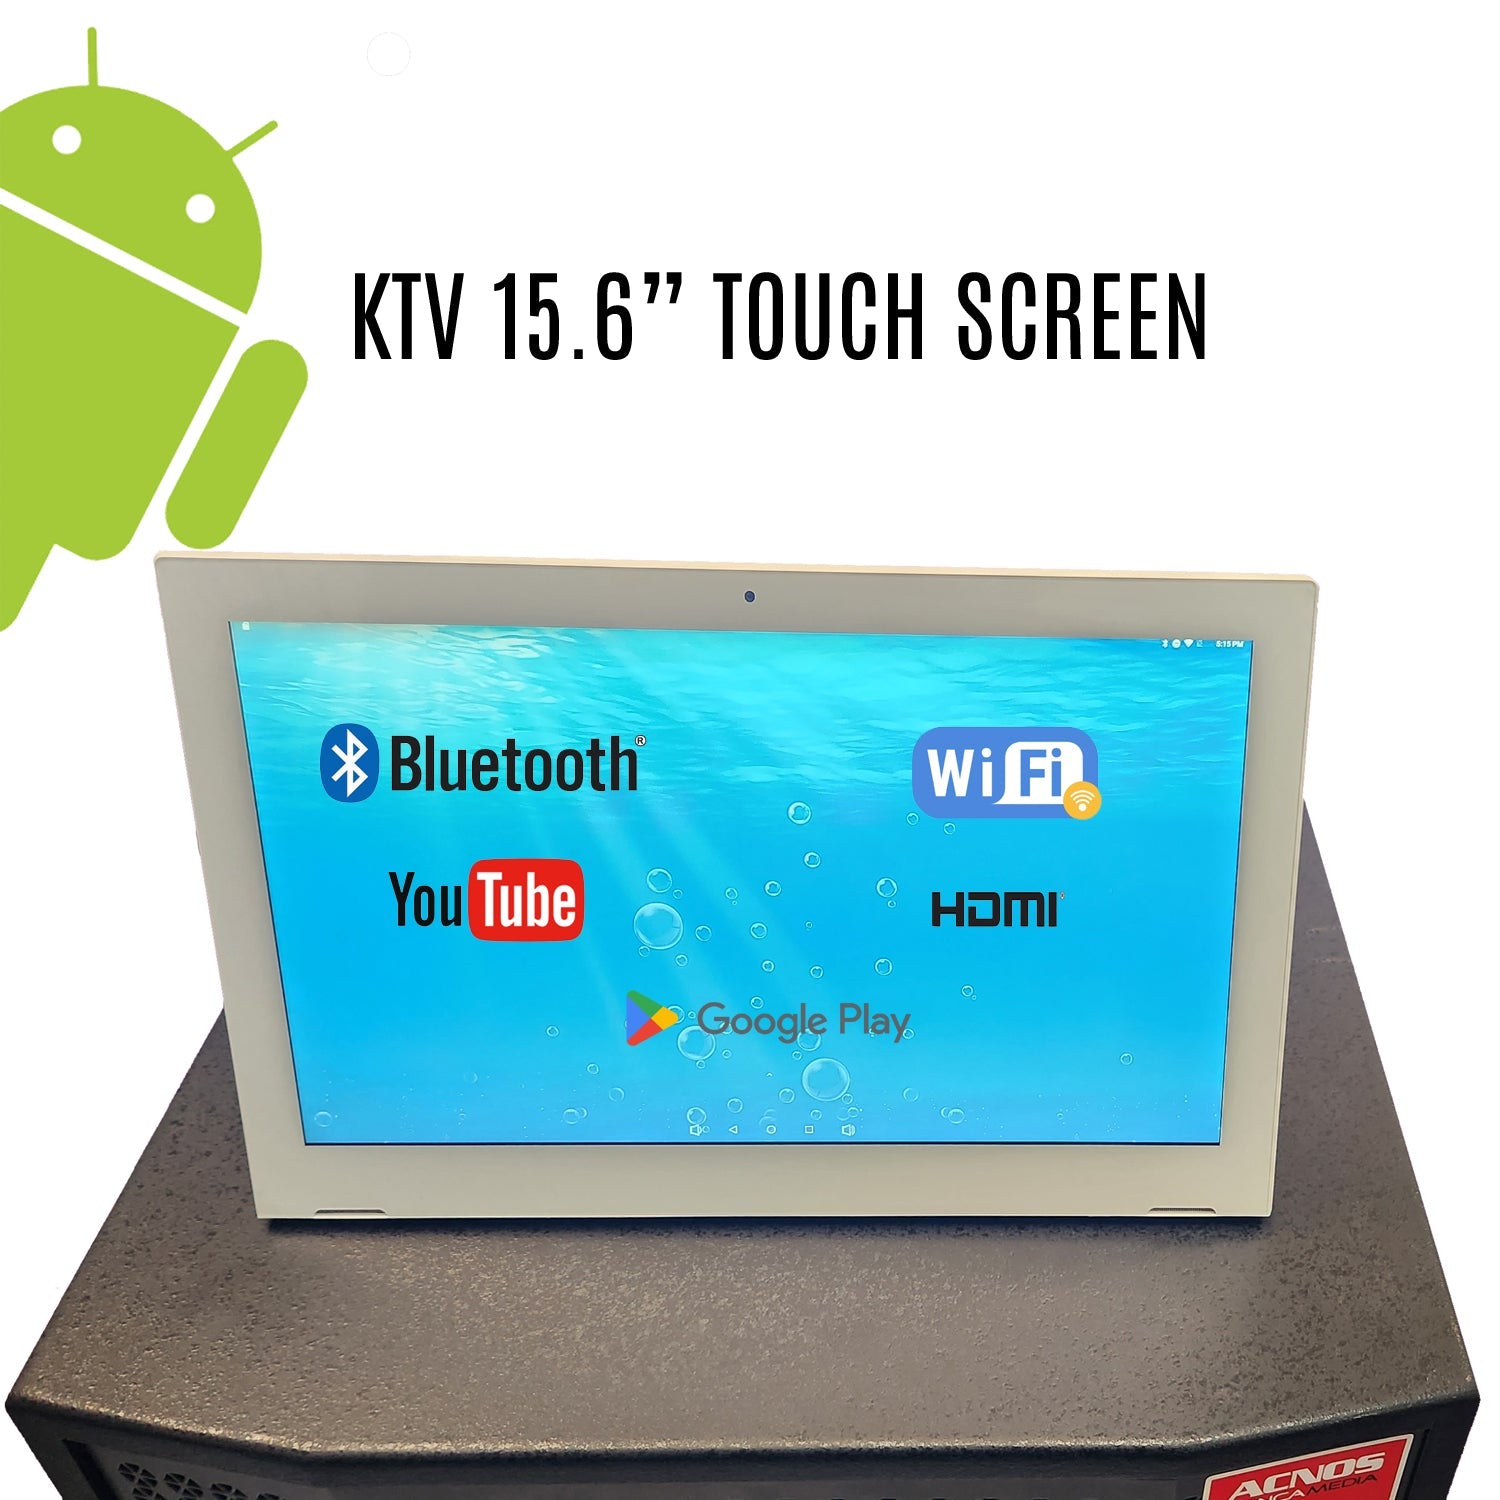 15.6" Karaoke Touch Screen System (Android OS + WIFI + Bluetooth + YouTube) - Karaoke Home Entertainment